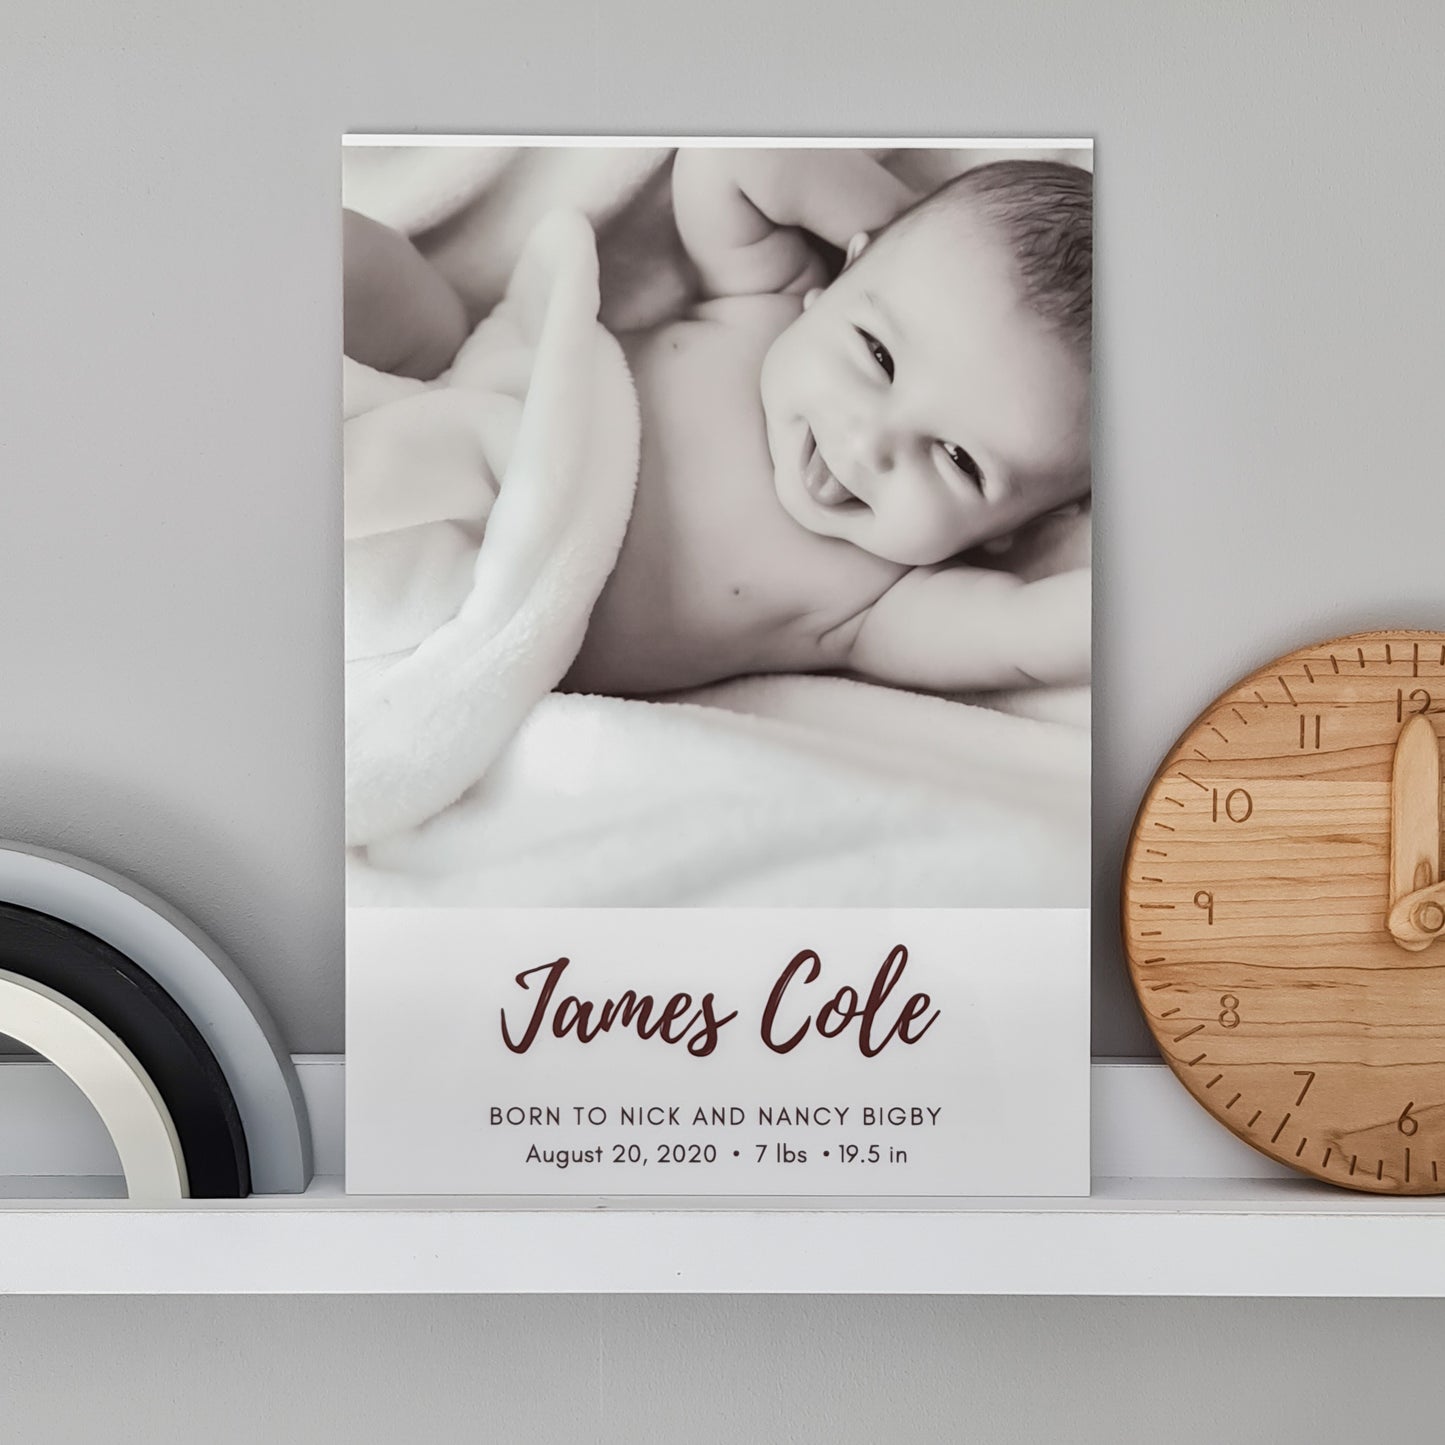 Personalised A4 Baby Announcement Acrylic Print - V&C Designs Ltd